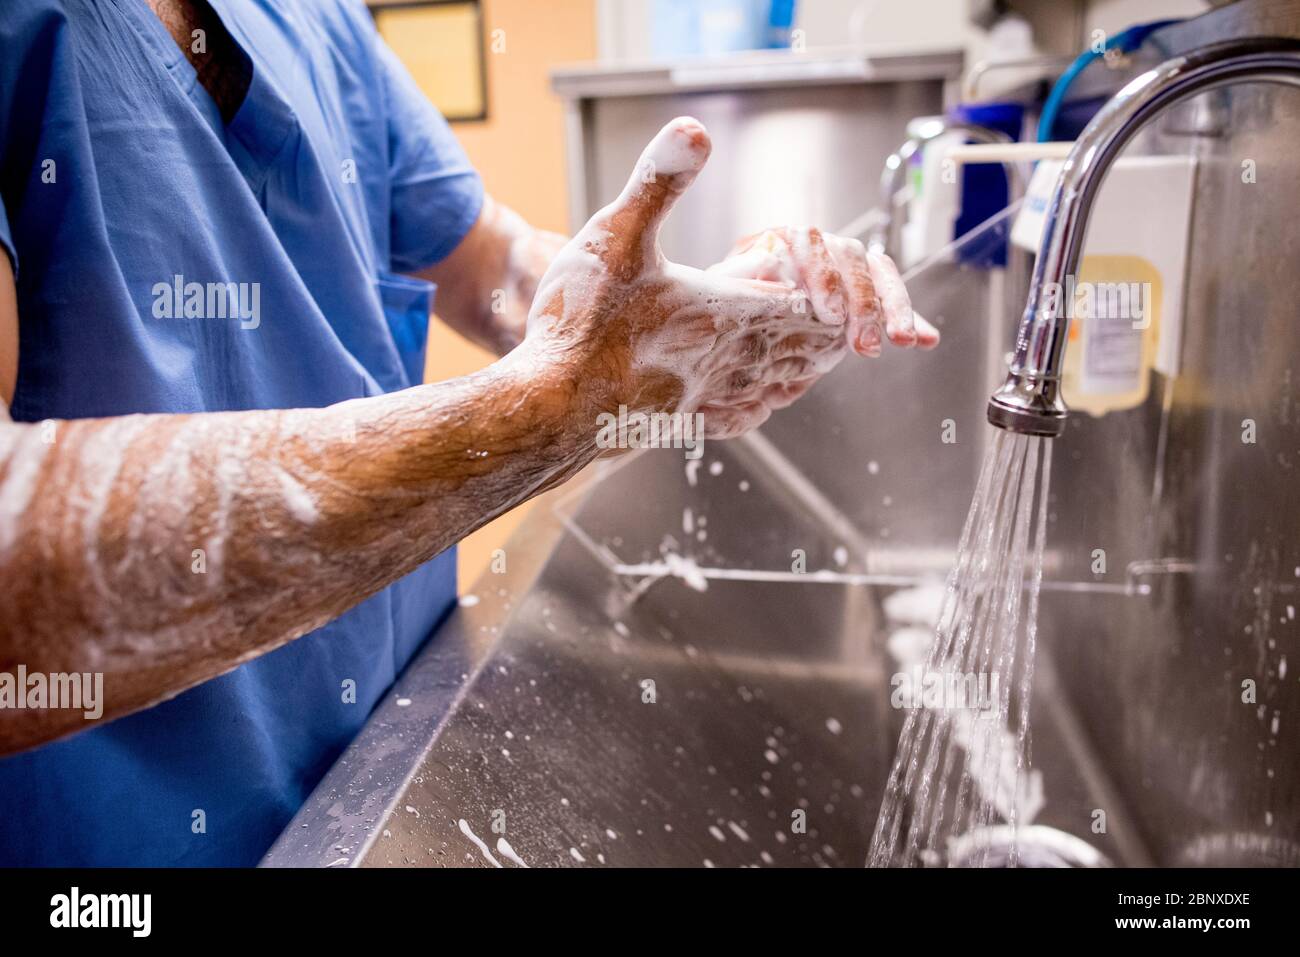 Covid-19 pandemic hand washing by medical professionals Stock Photo